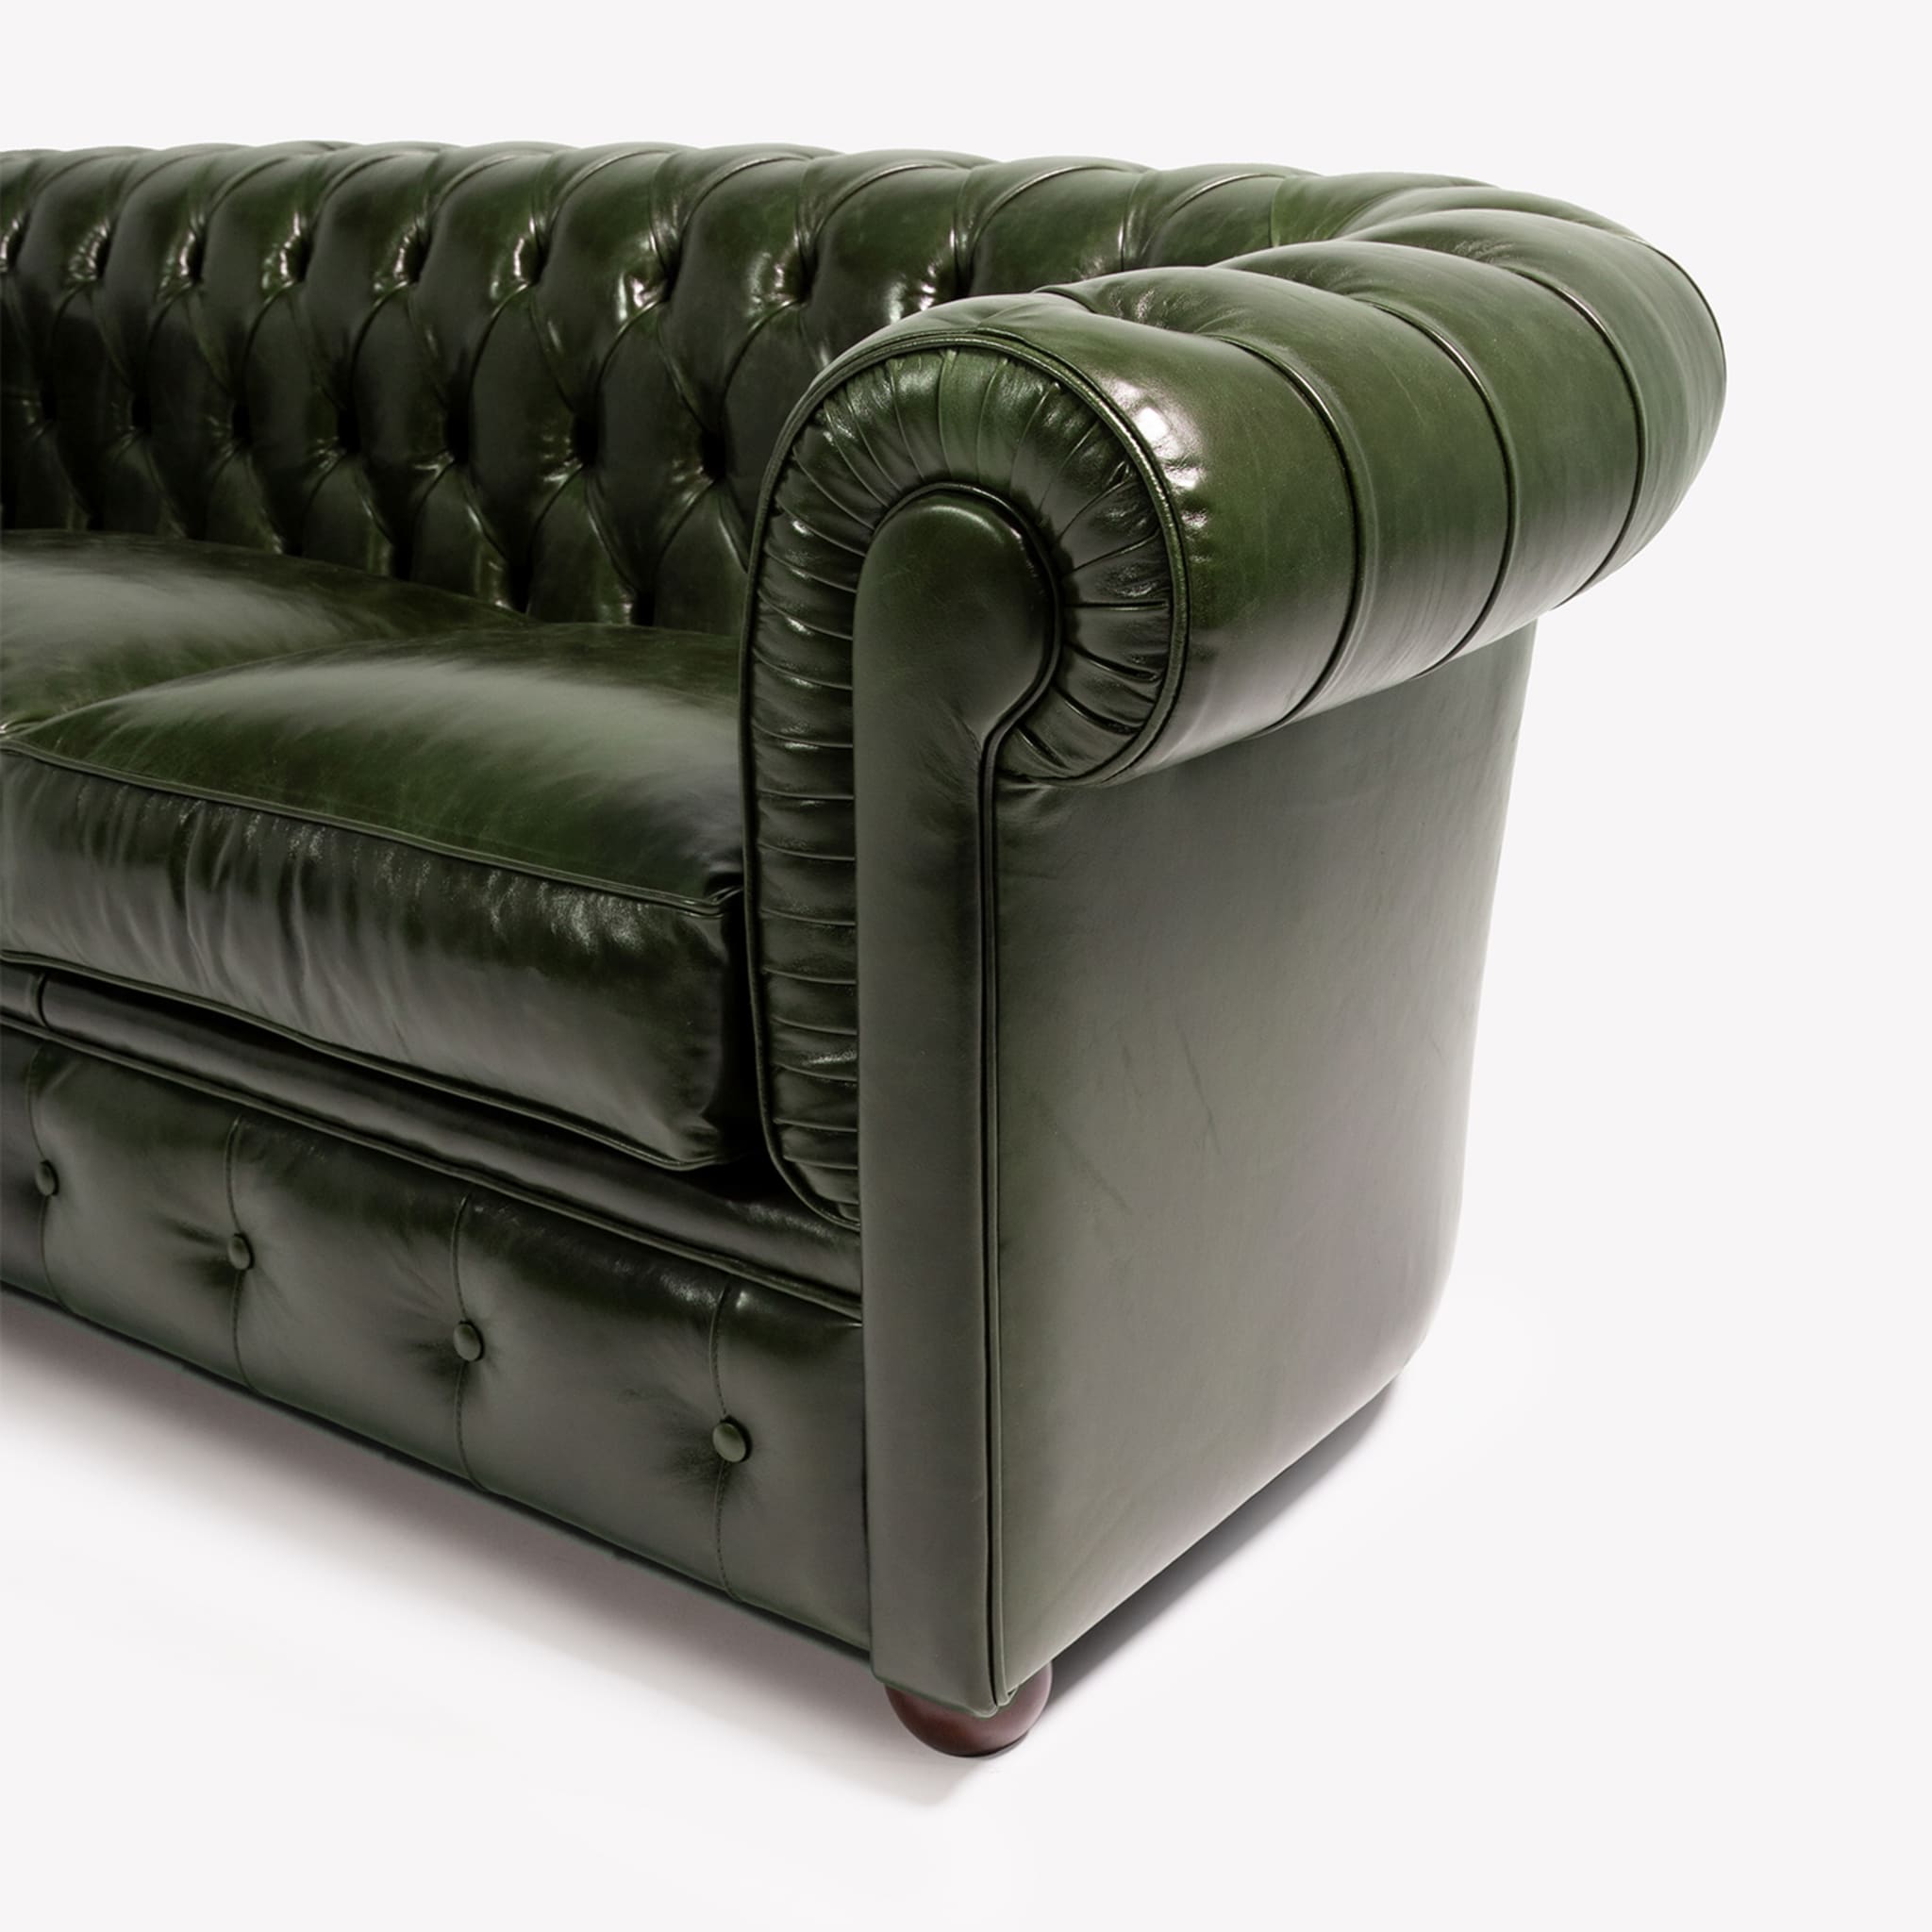 Chesterfield Green Leather 3-Seater Sofa - Alternative view 2